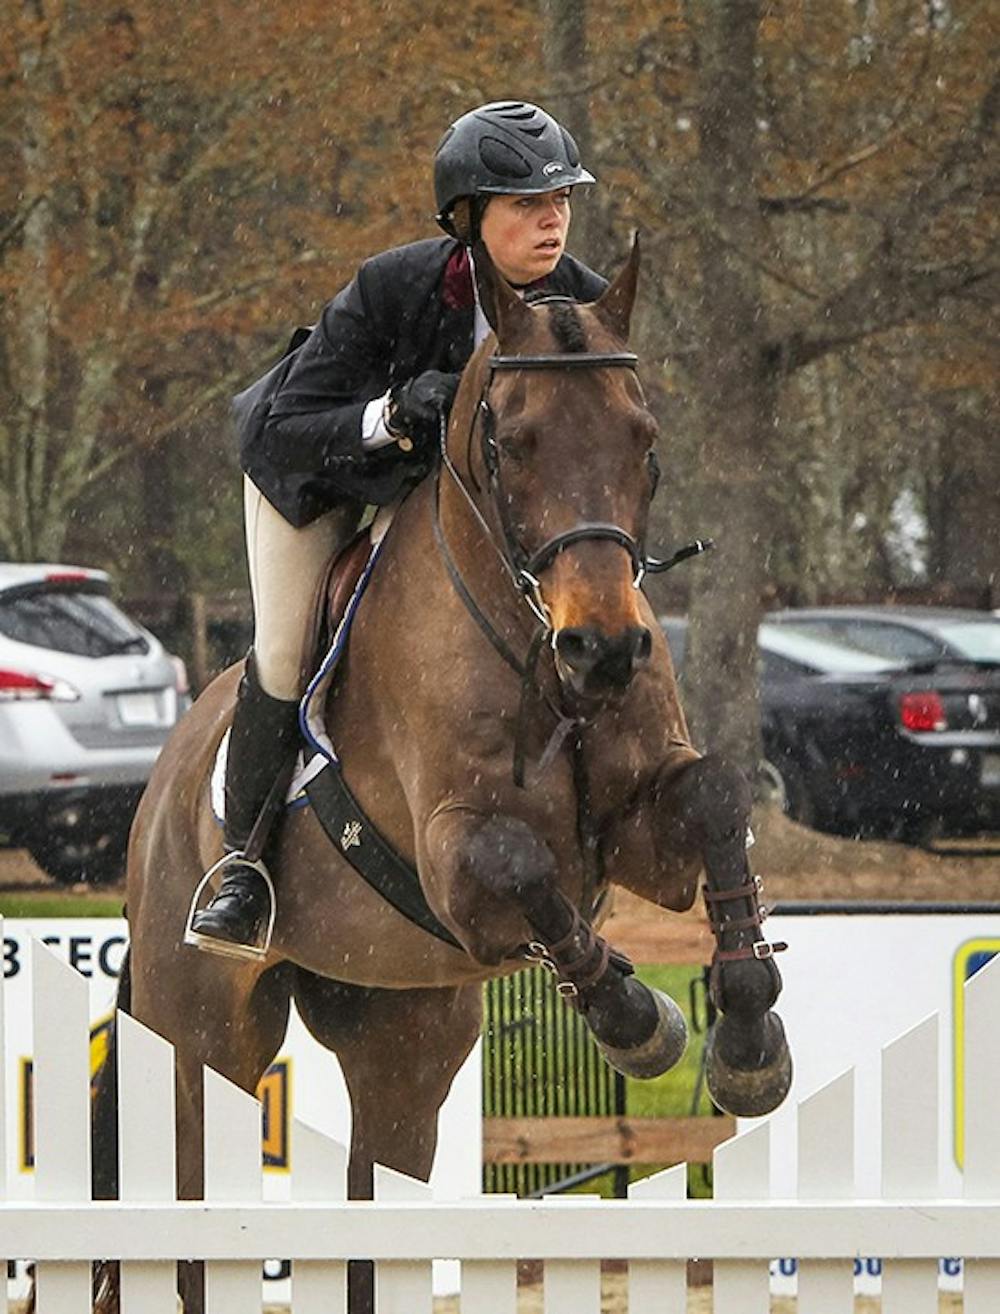 South Carolina&apos;s Katherine Schmidt competes on Tony in the Equitation Over Fences competition against Texas A&amp;M in Blythewood, S.C., Friday, March 28, 2014. (Tim Dominick/The State/MCT)